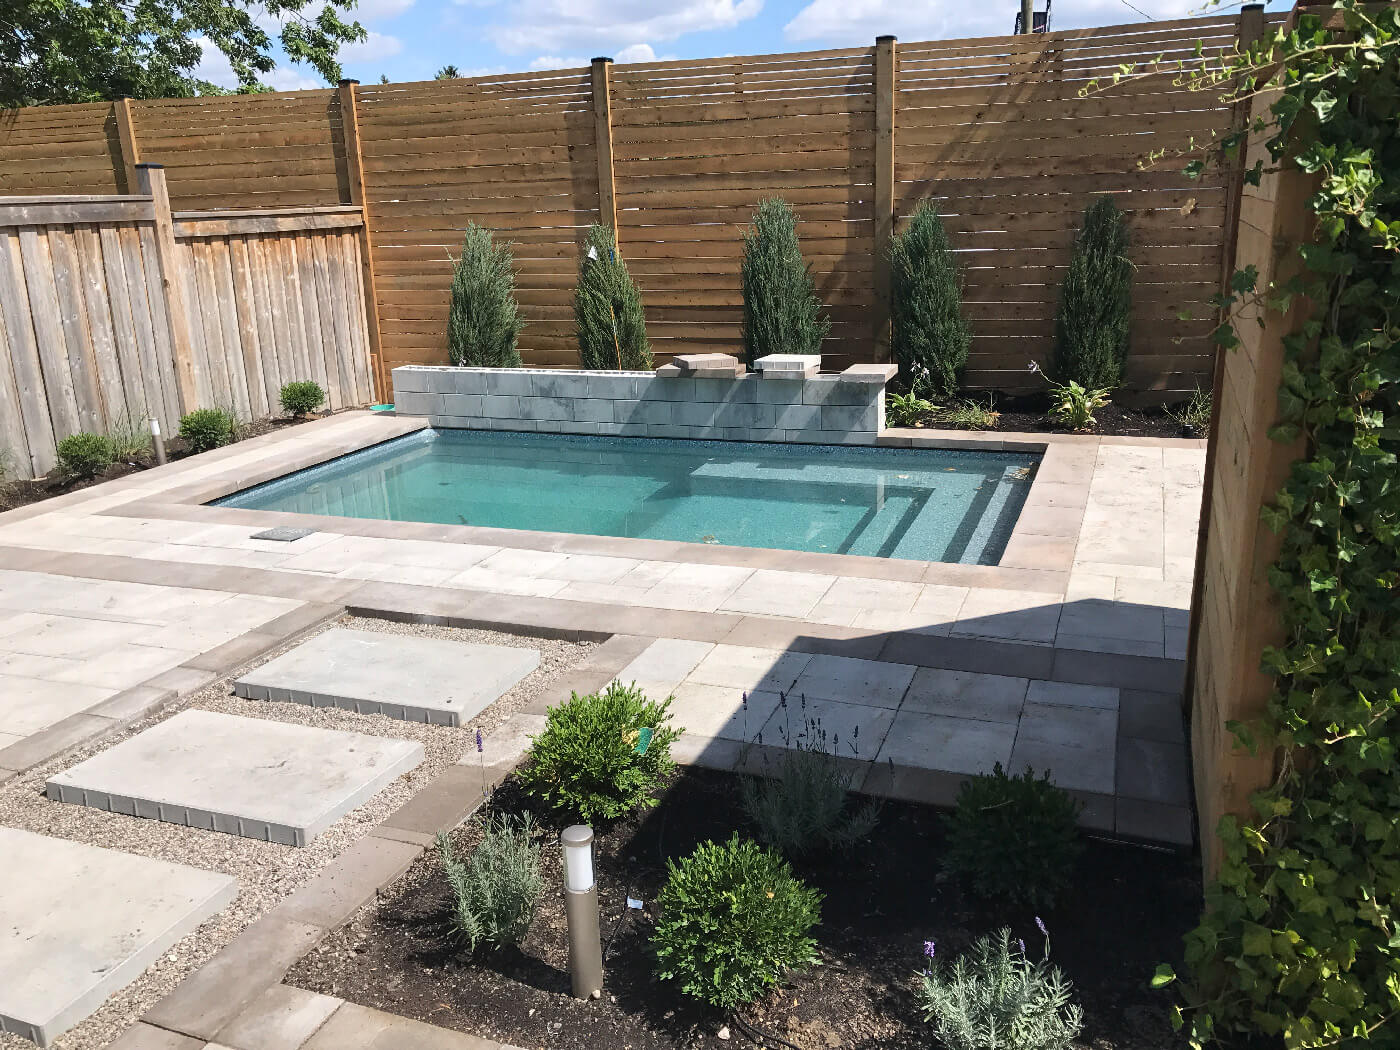 Stone patio installed around saltwater swimming pool built by Seaway Pools & Hot Tub designers.